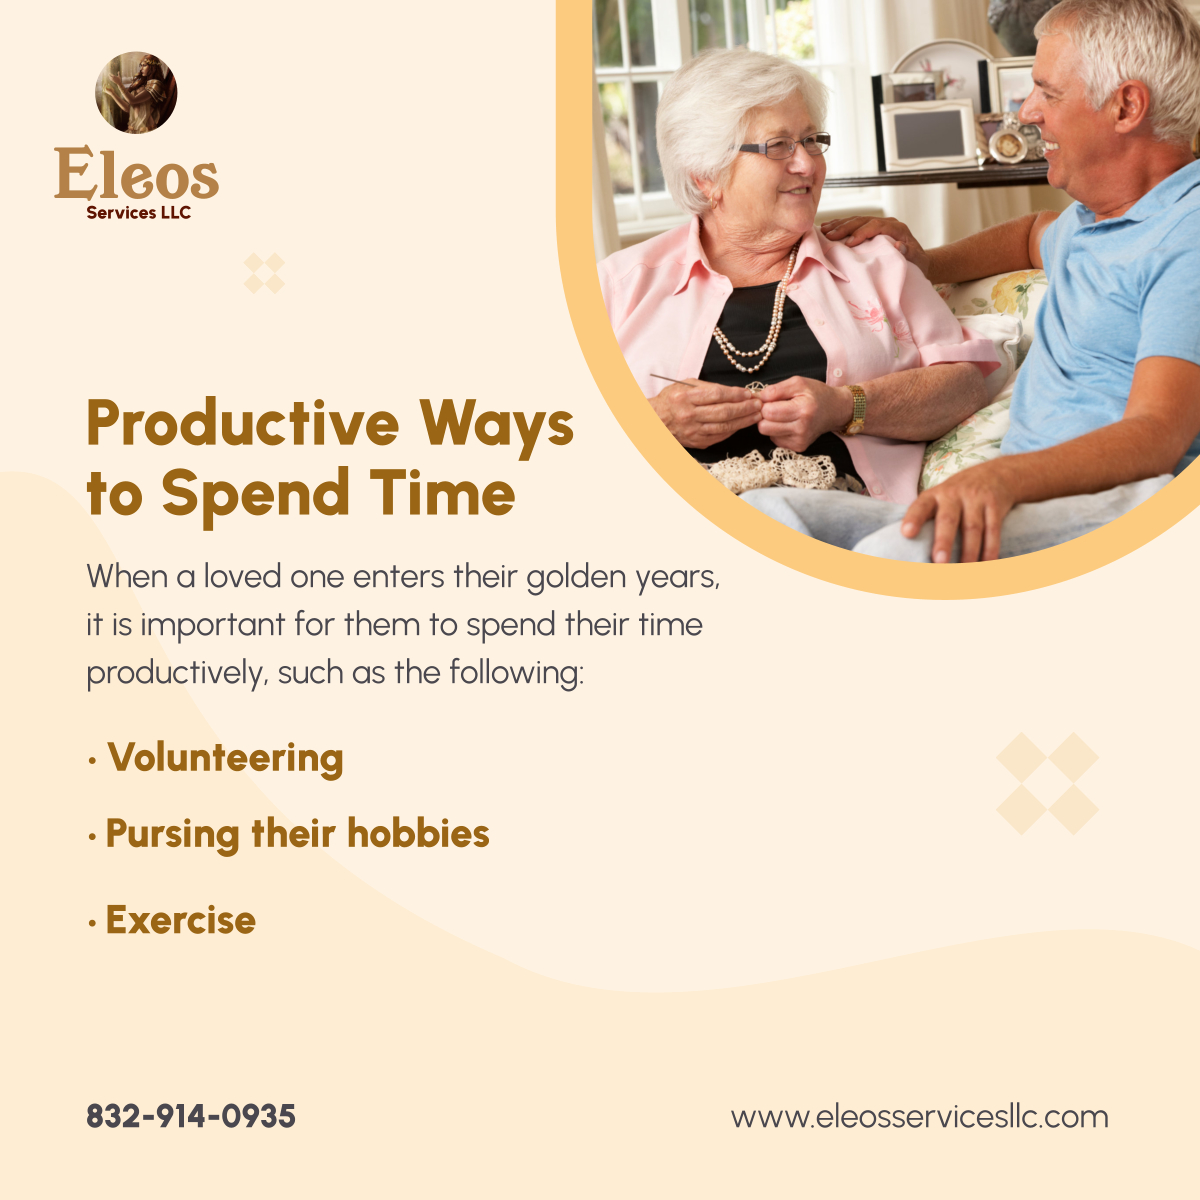 Engaging in activities that bring them joy is vital, as it enhances your loved one's mental and physical health, improving their quality of life. Most of all, you should make time to join them in their activities...

#CompanionshipMatters #SeniorHealth